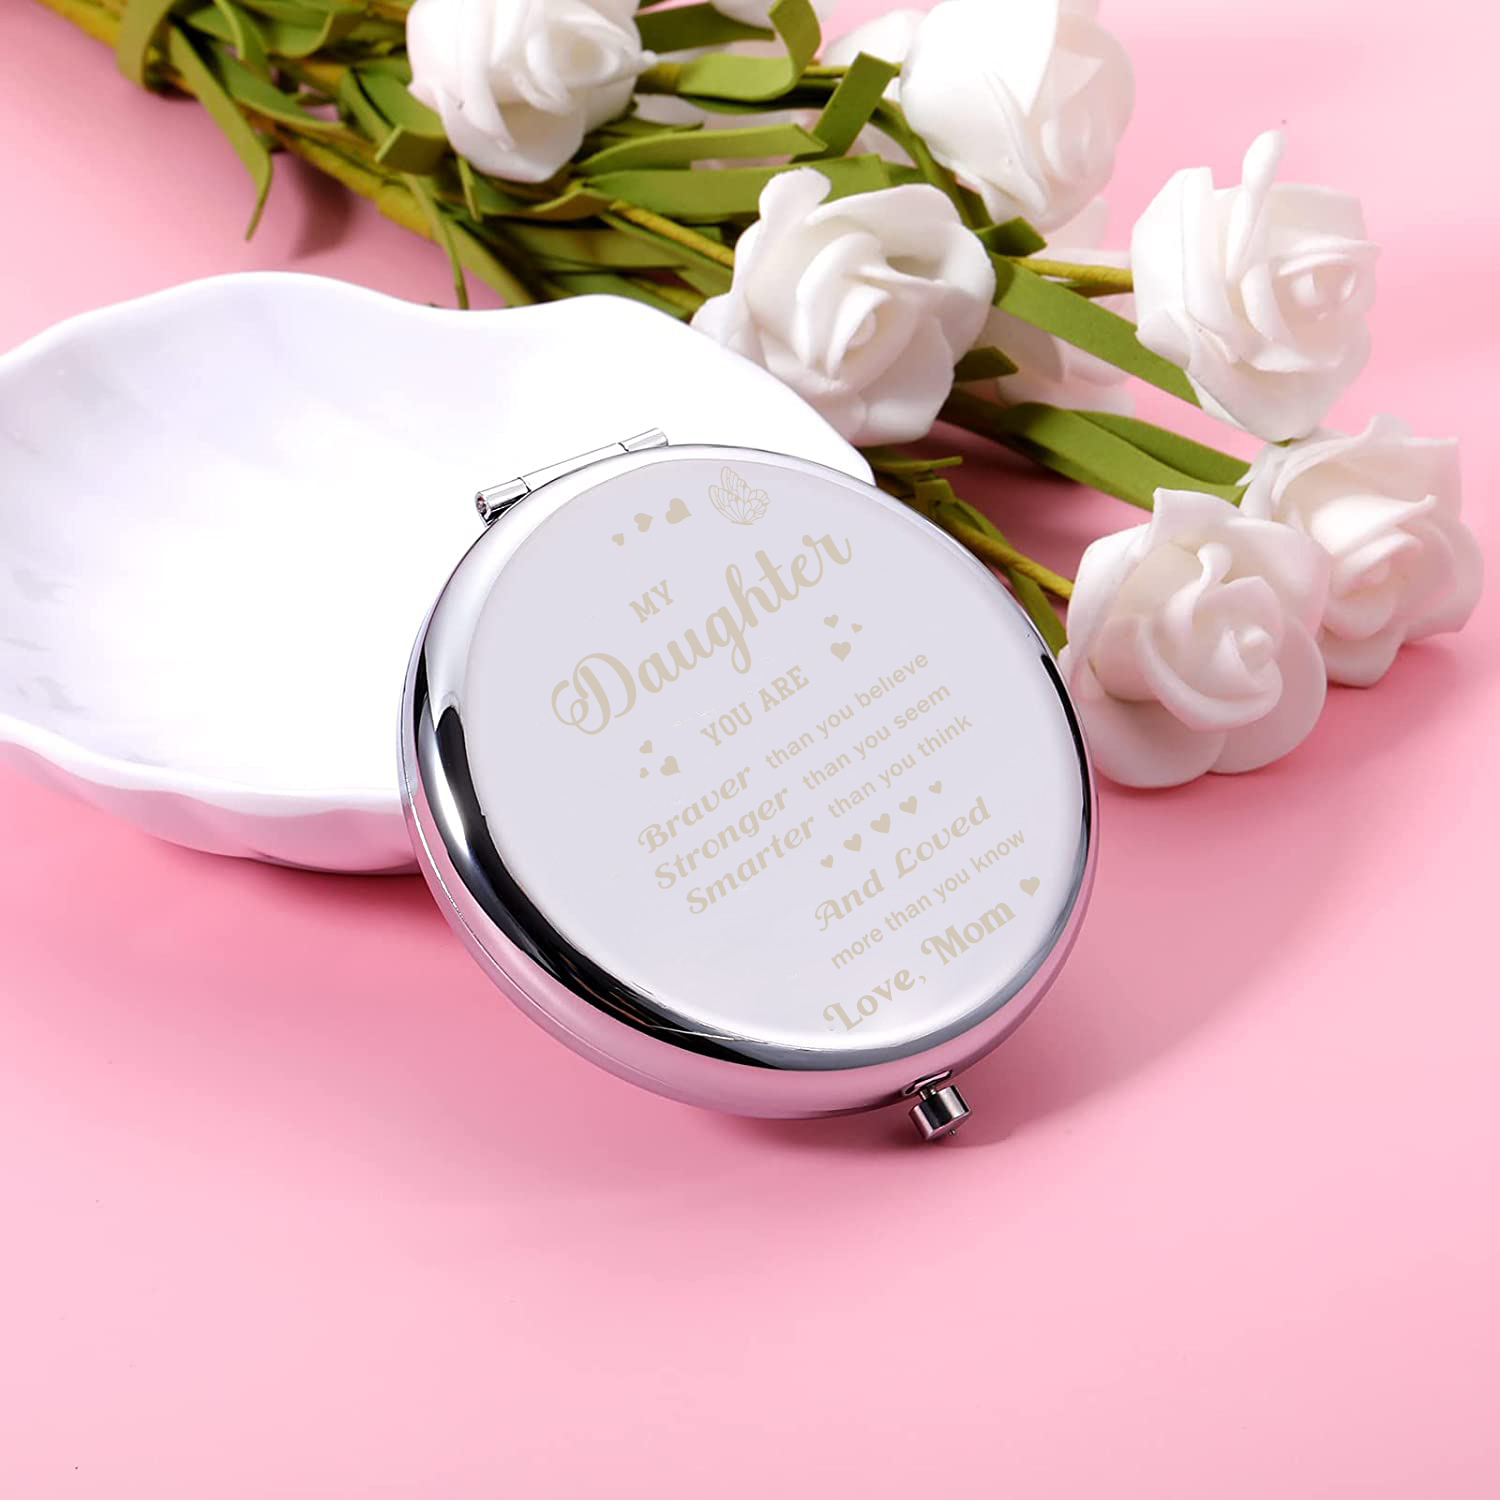 Tatuo 24 Set Inspirational Appreciation Gifts Compact Mirrors Bulk for  Women Gift Sets Pocket Makeup Mirrors for Purses for Bachelorette Bridal  Party Souvenir Gift